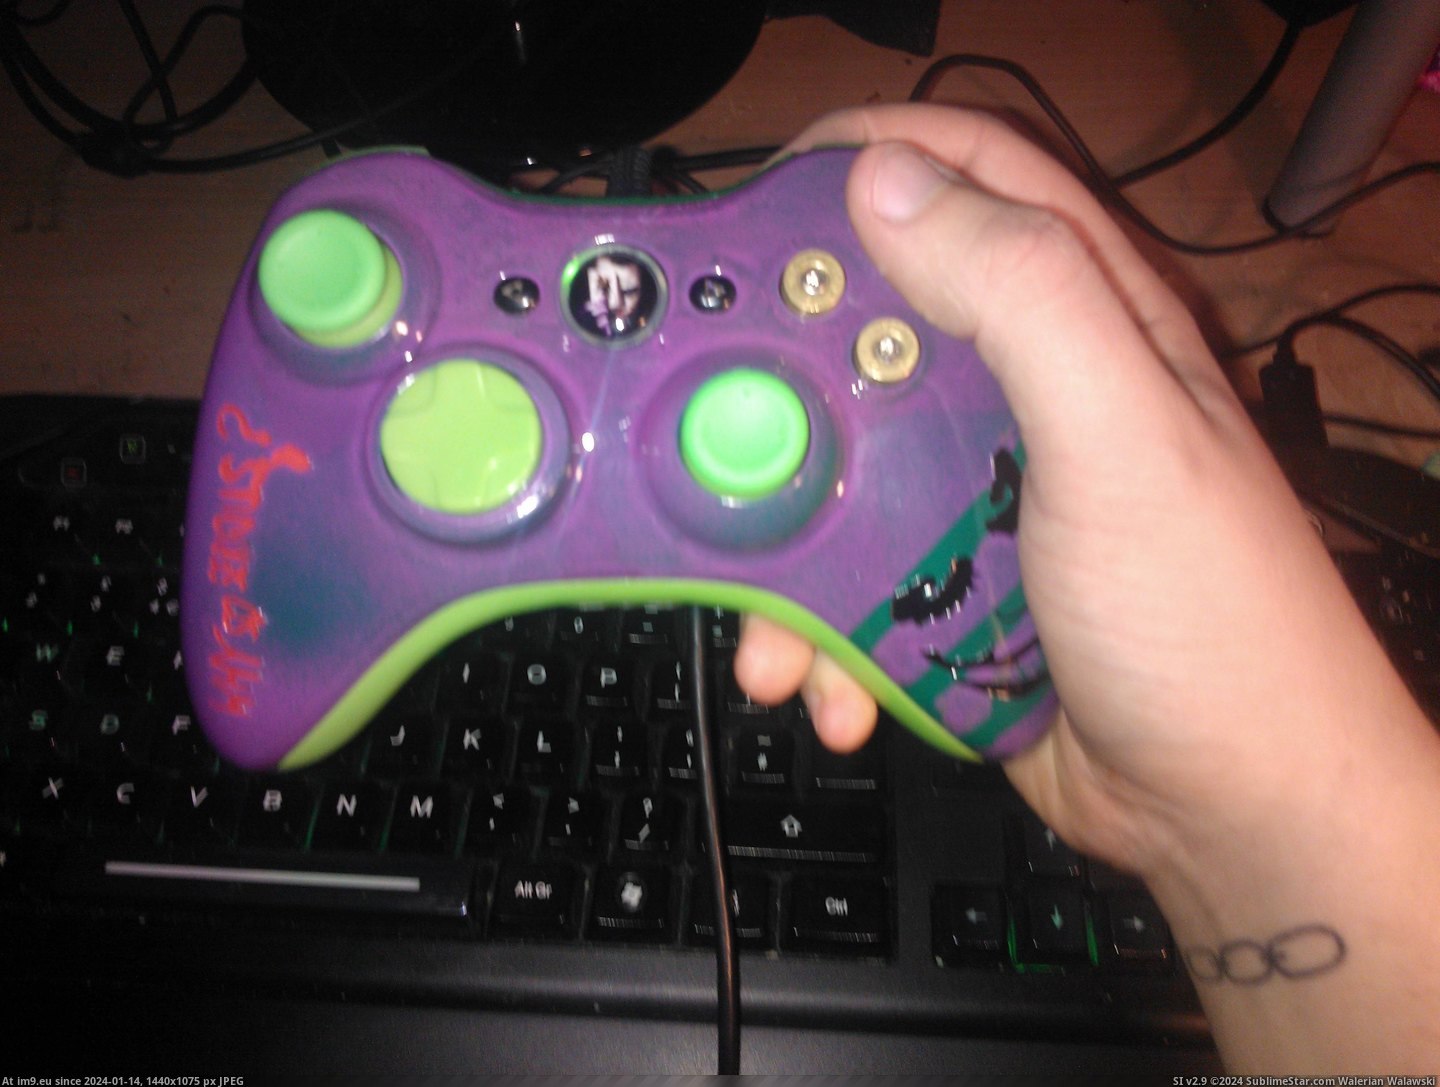 #Album #Gaming #Pretty #Law #Controllers #Brother #Cool #Xbox [Gaming] So my Brother in-law made some pretty cool custom xbox controllers [ALBUM] 8 Pic. (Изображение из альбом My r/GAMING favs))